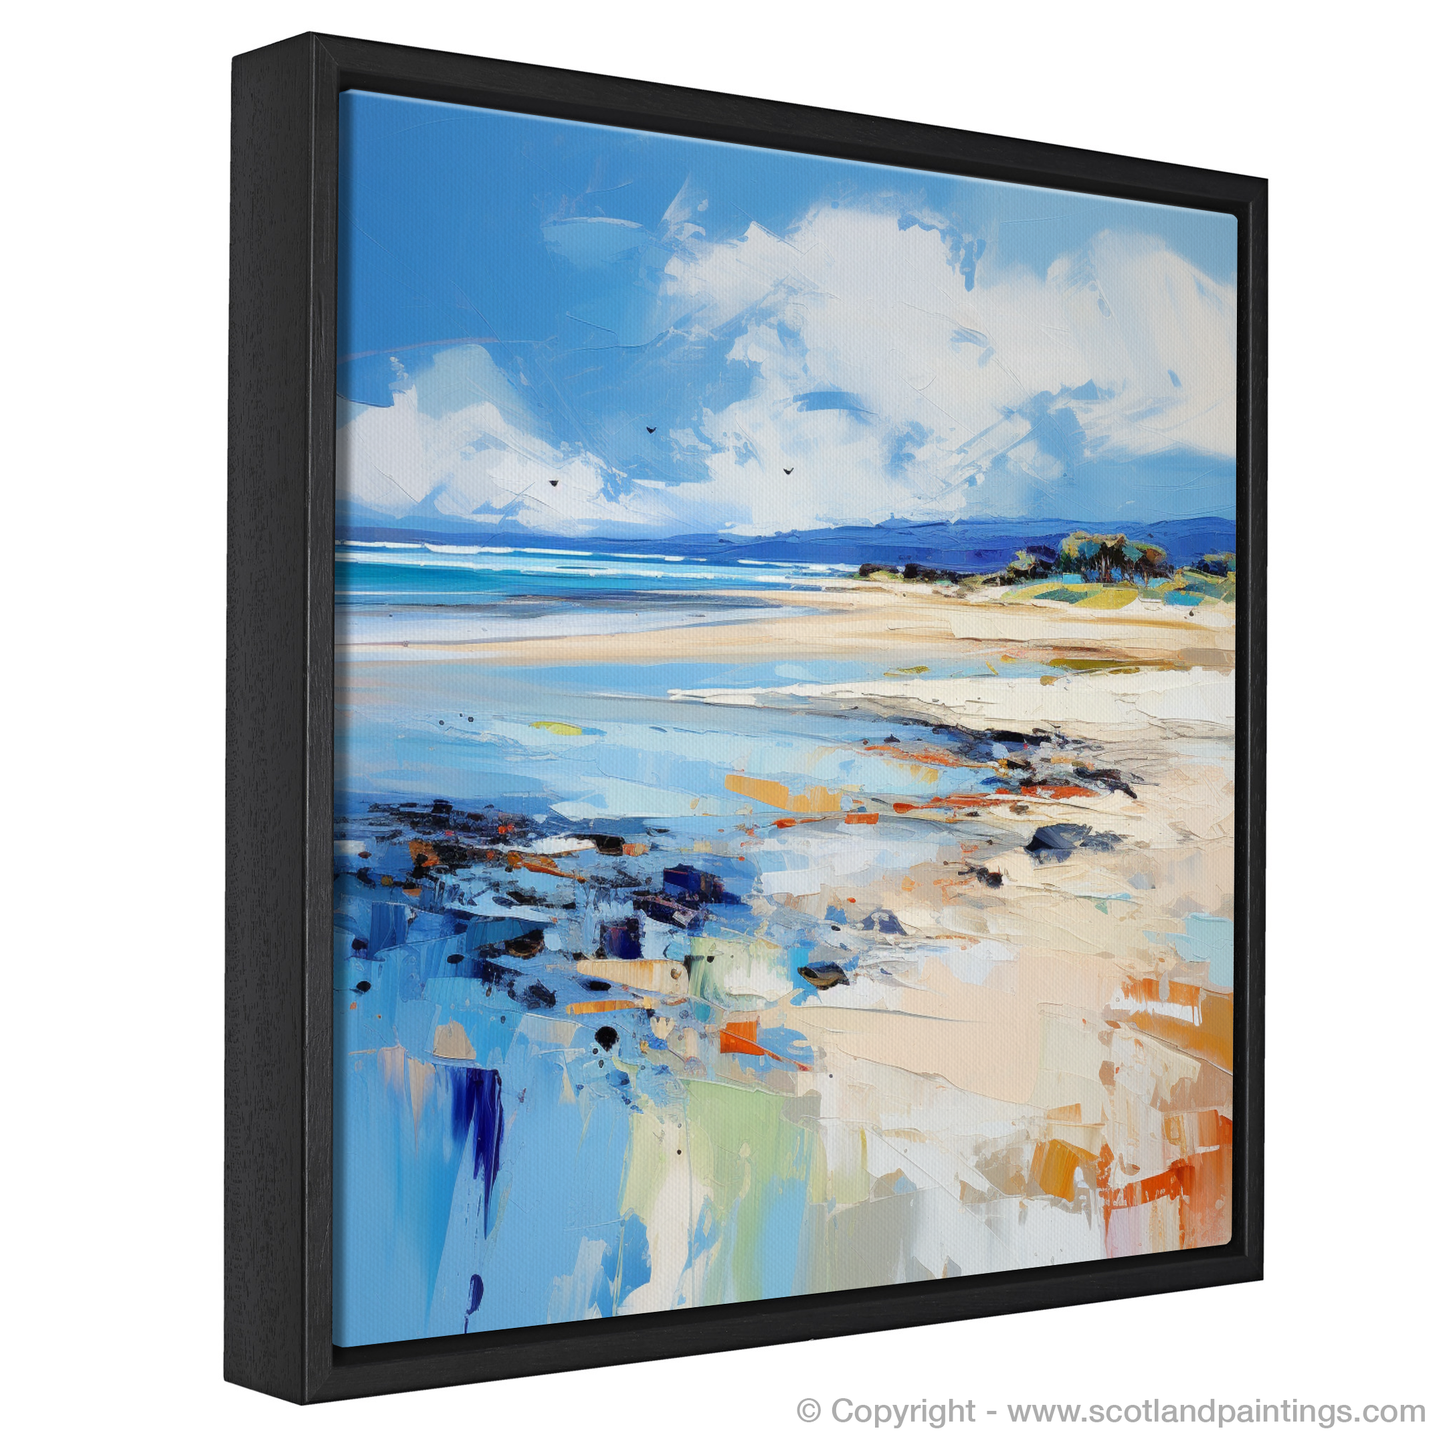 Painting and Art Print of Nairn Beach, Nairn entitled "Ethereal Shores of Nairn Beach".